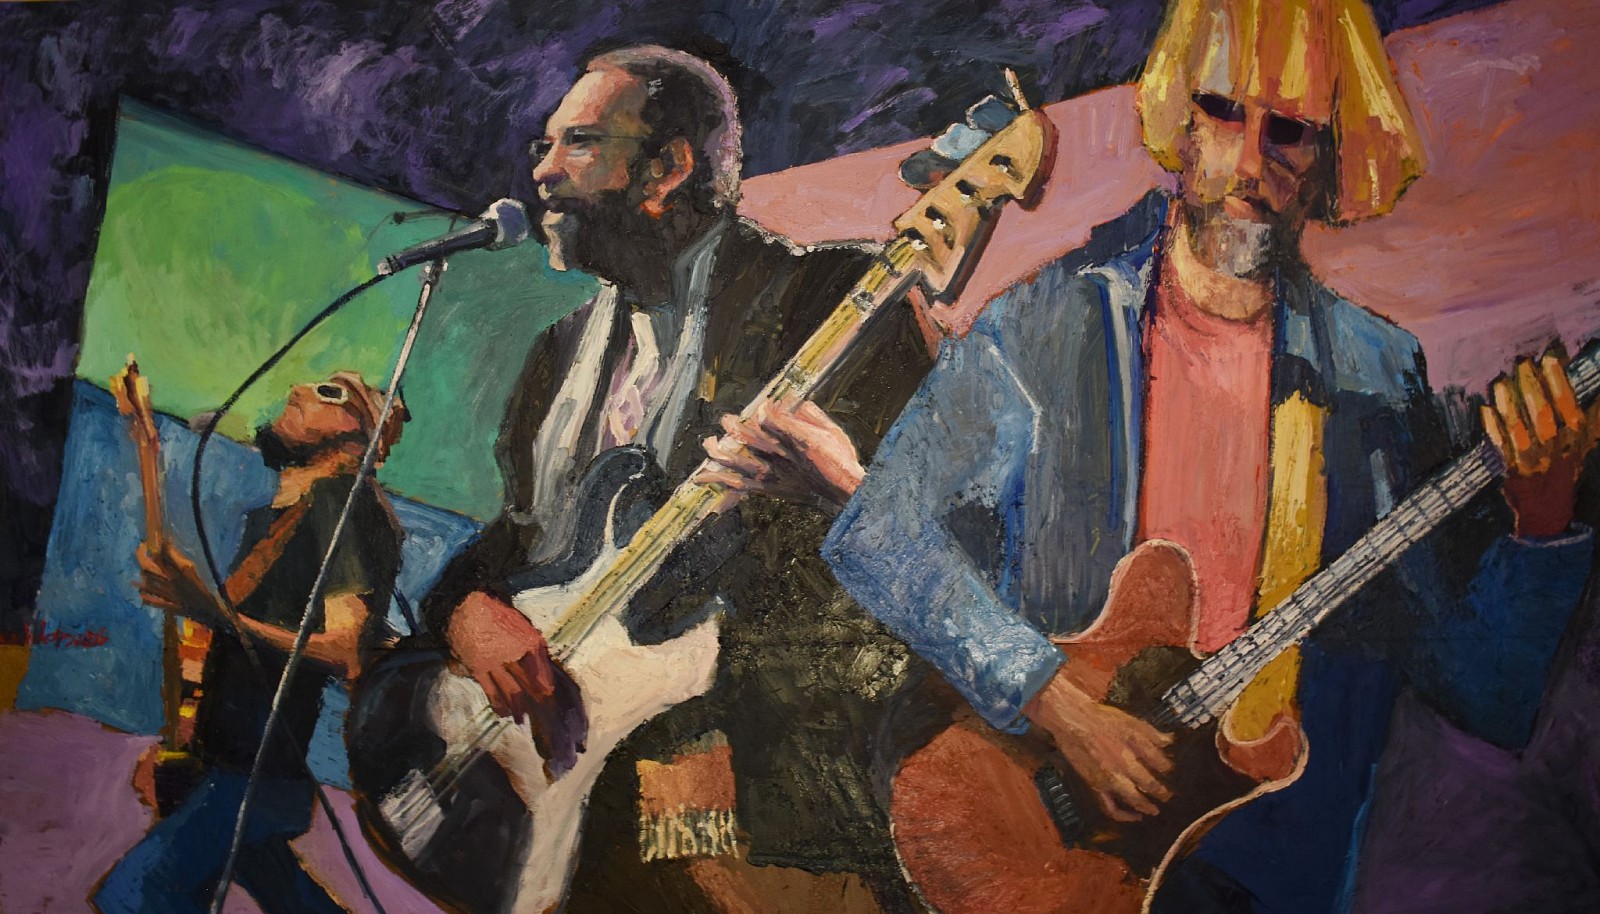 James Michalopoulos, George & Anders
Oil on Wood
$23,500